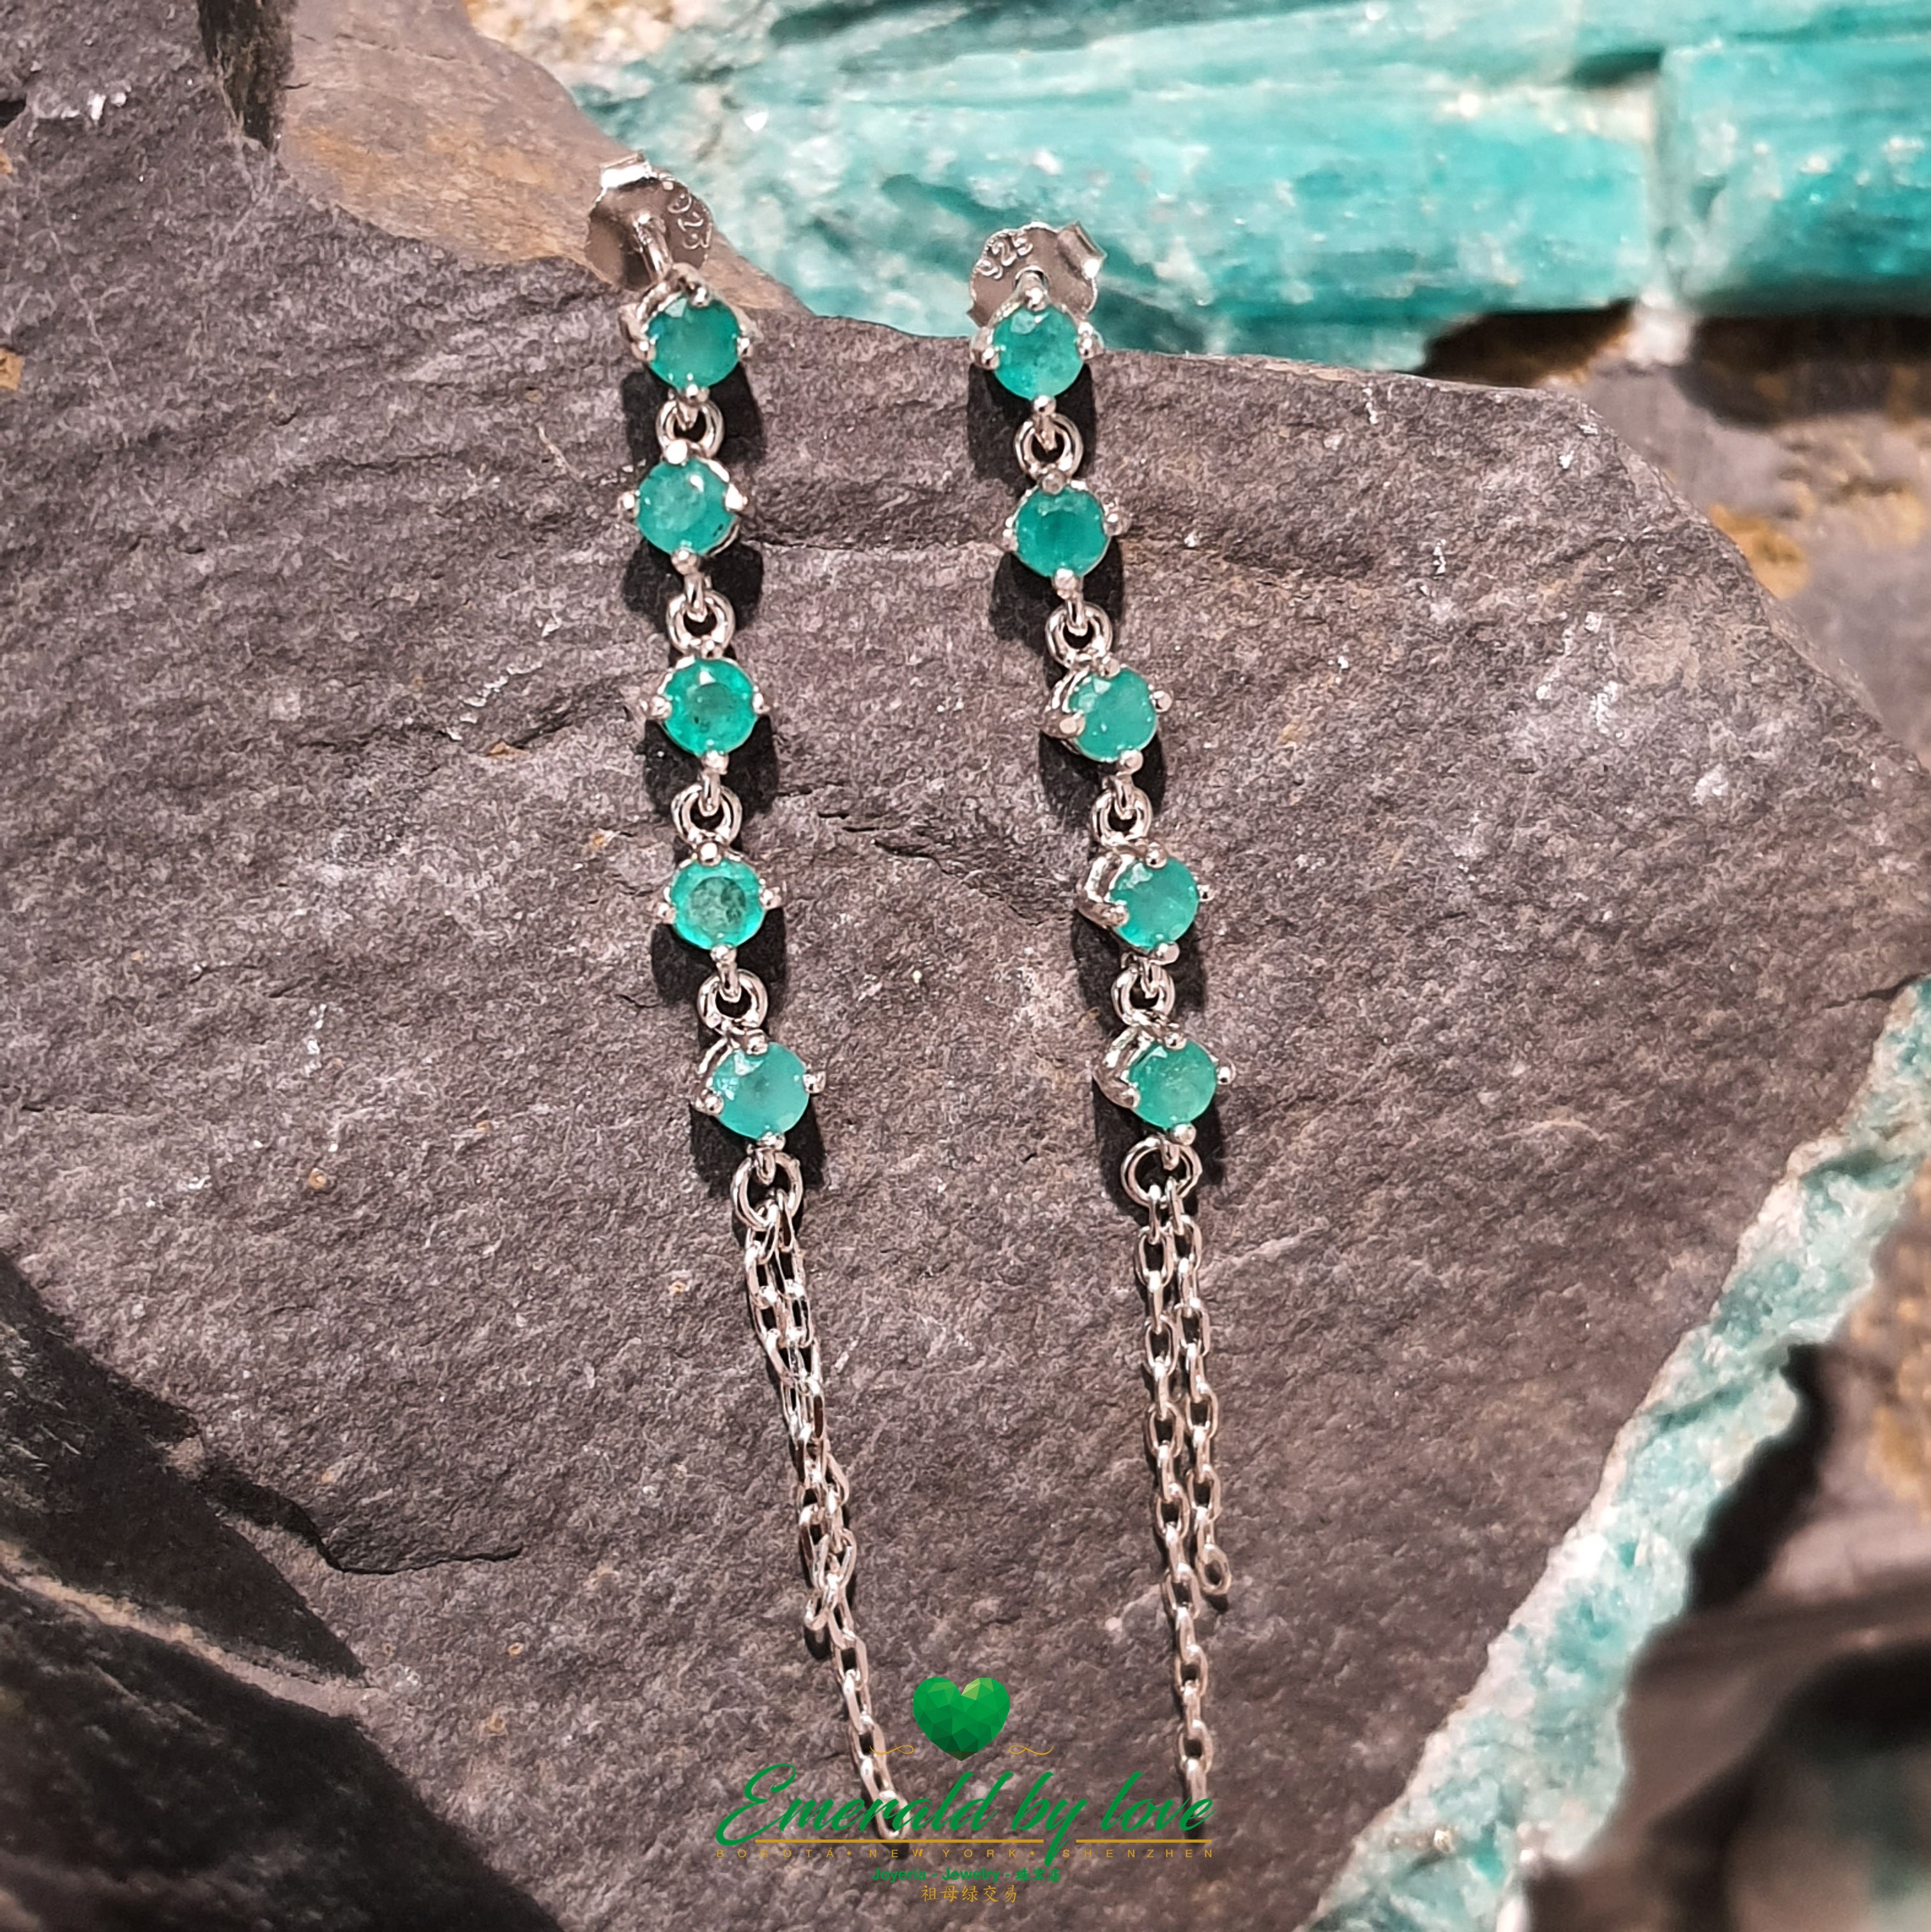 Fashionista Long Silver Earrings with Round Colombian Emeralds